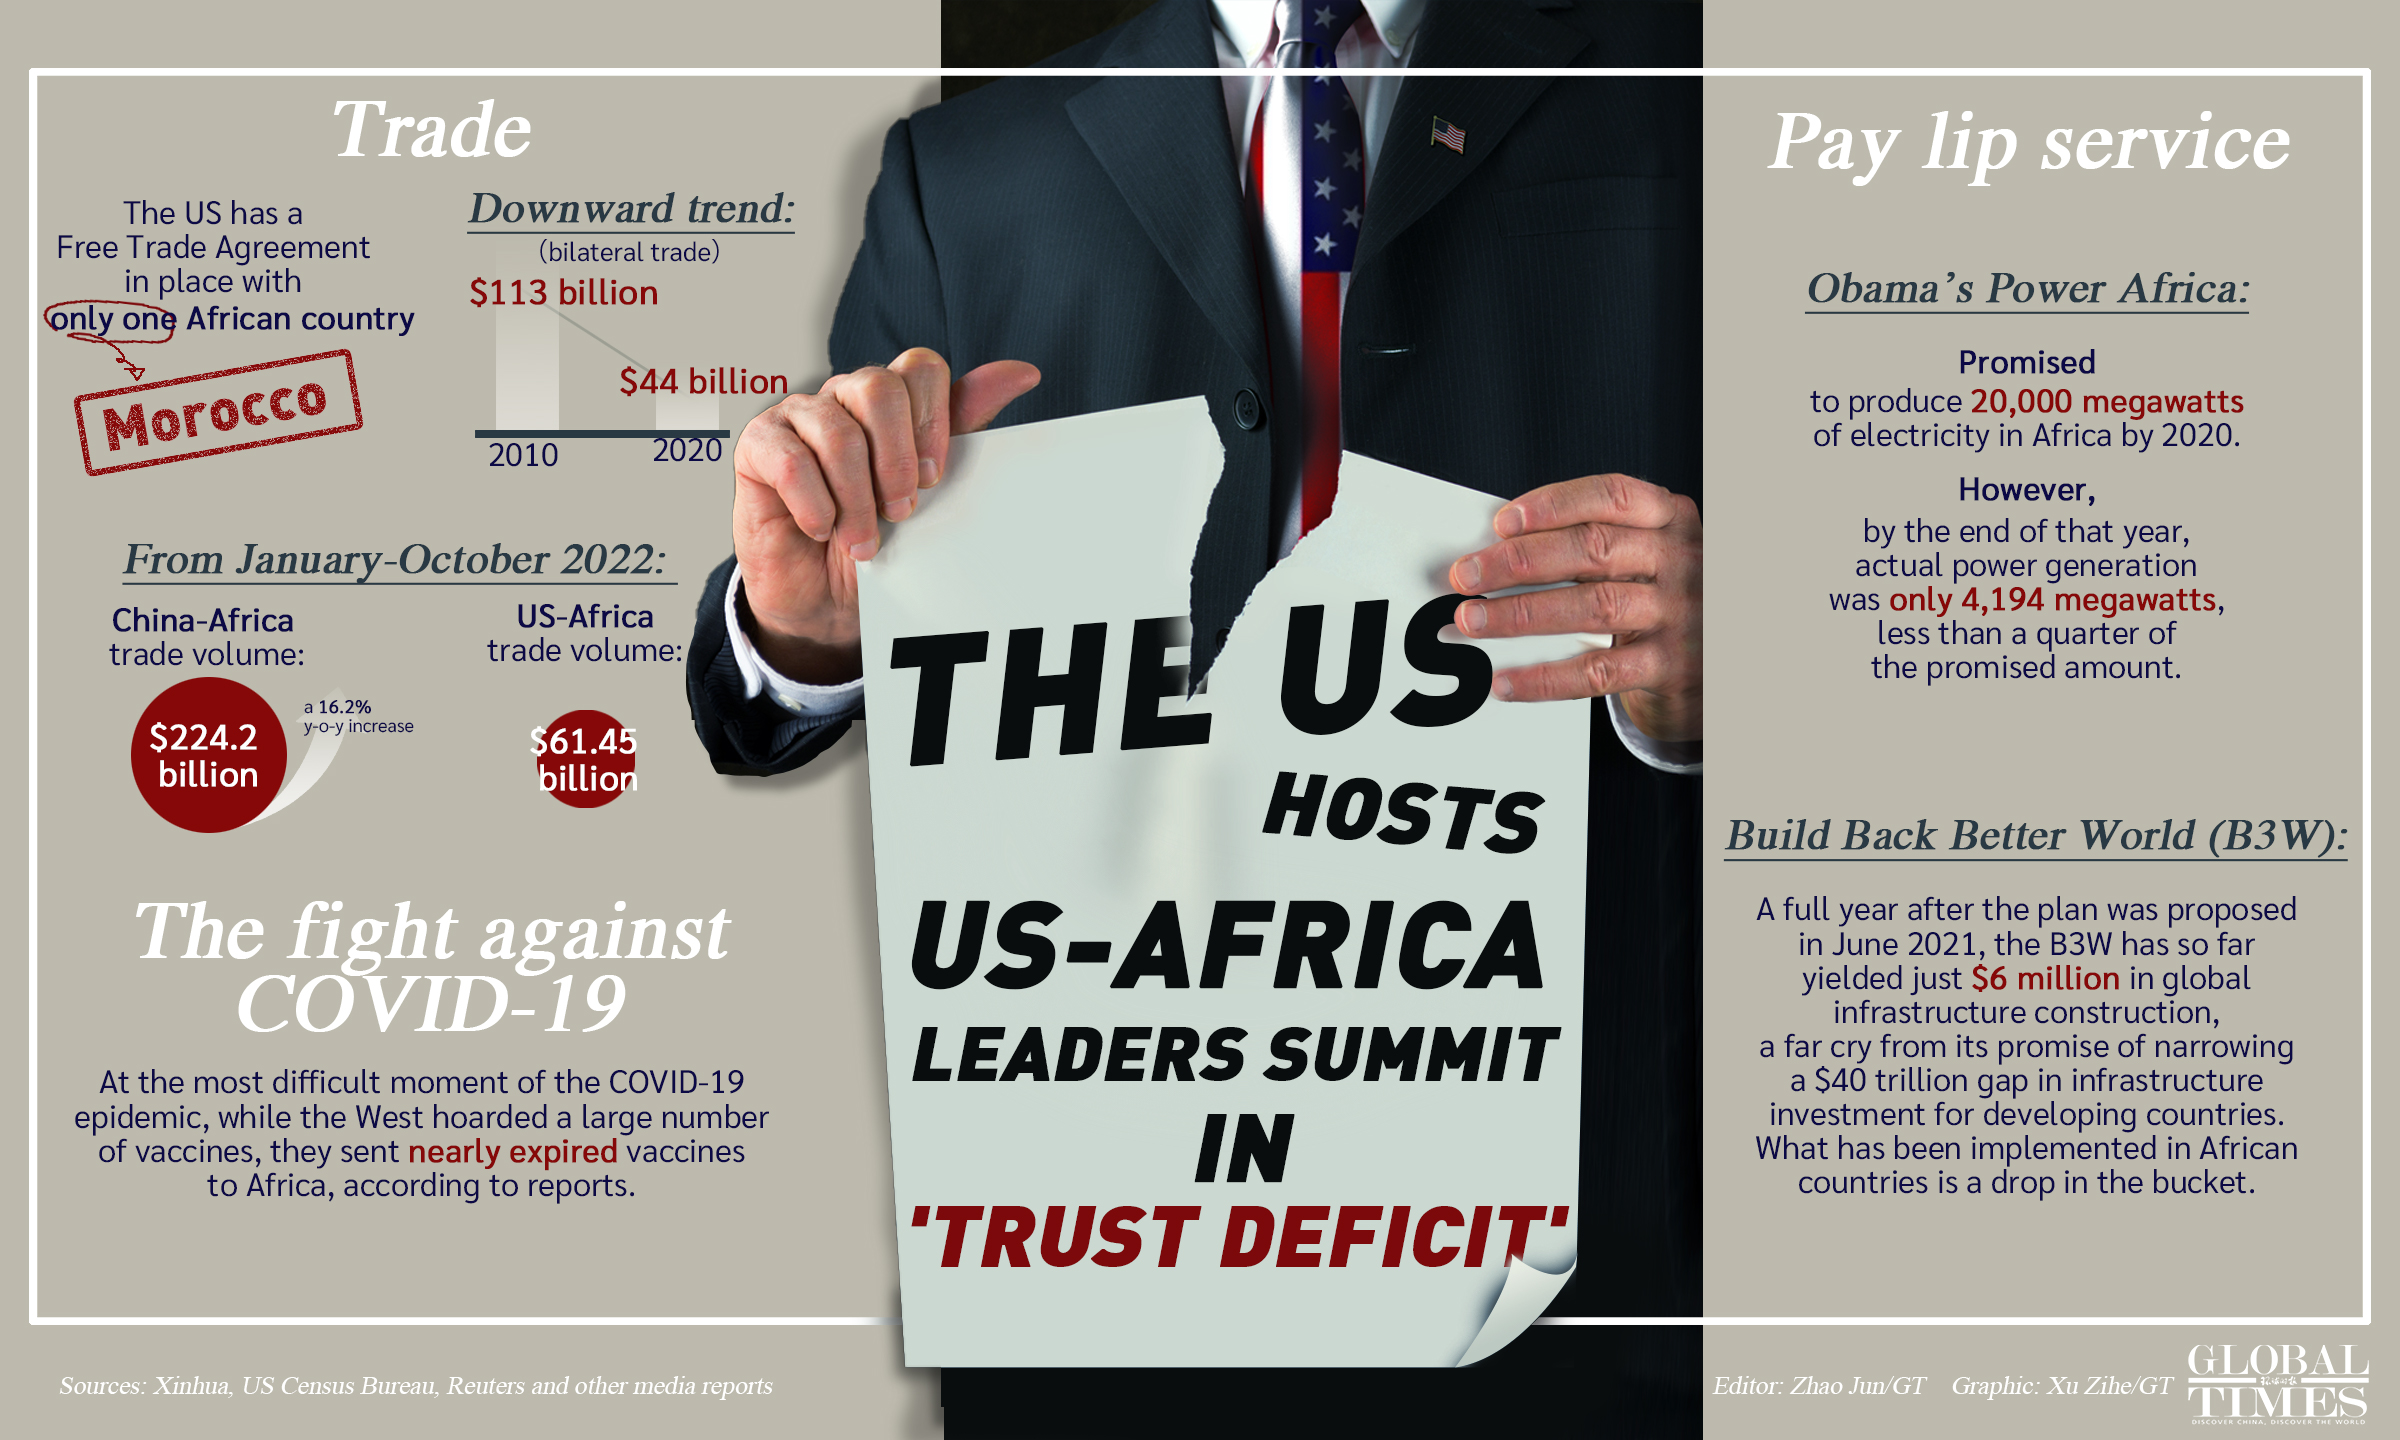 The US hosts US-Africa Leaders Summit in 'trust deficit'. Graphic: GT